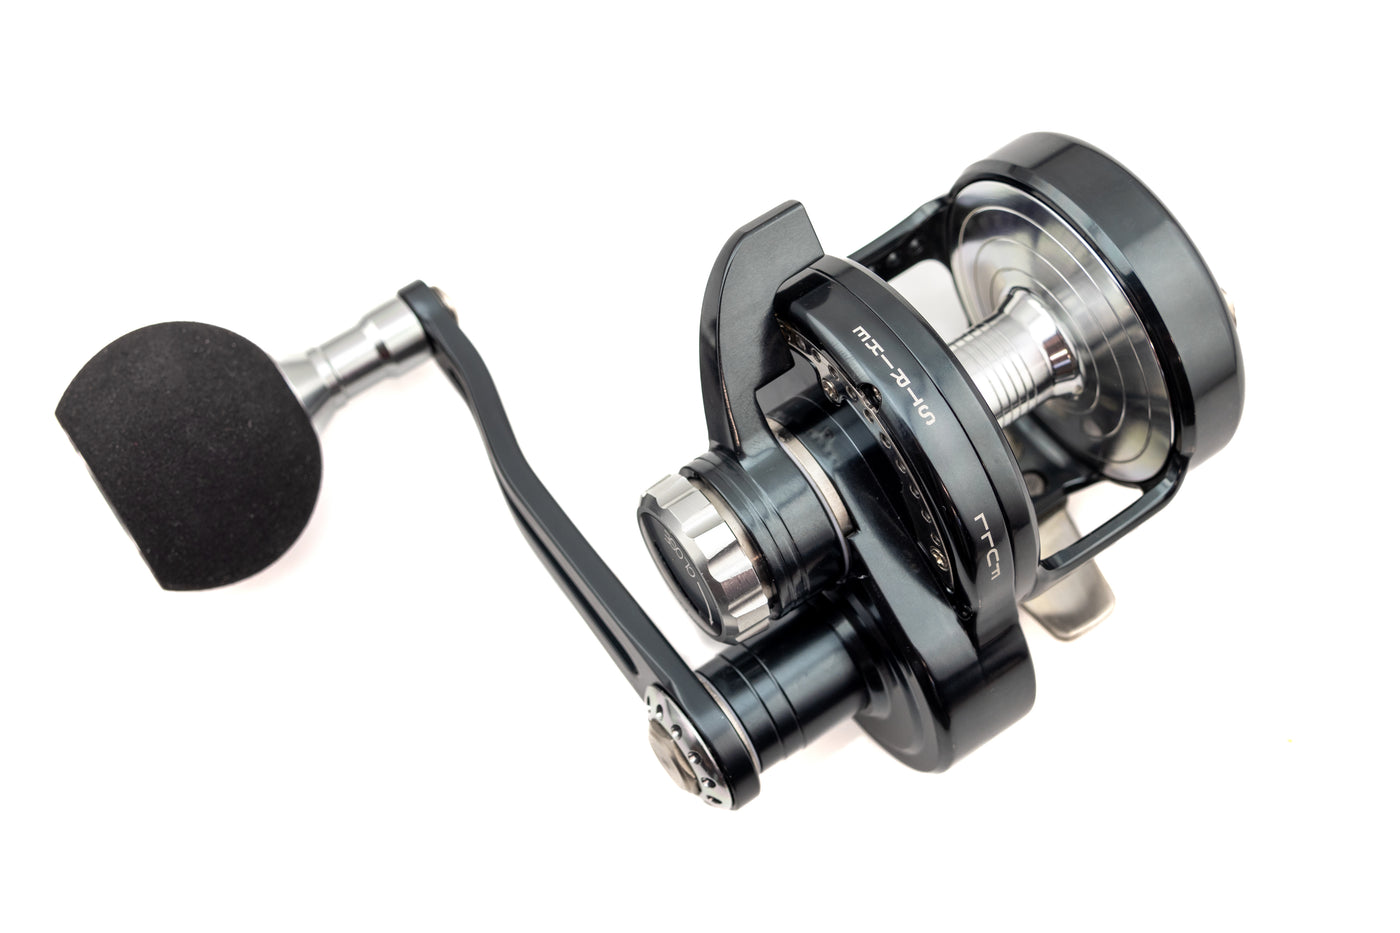 NEW Accurate Fury! A reel specially designed for Striped Bass. 